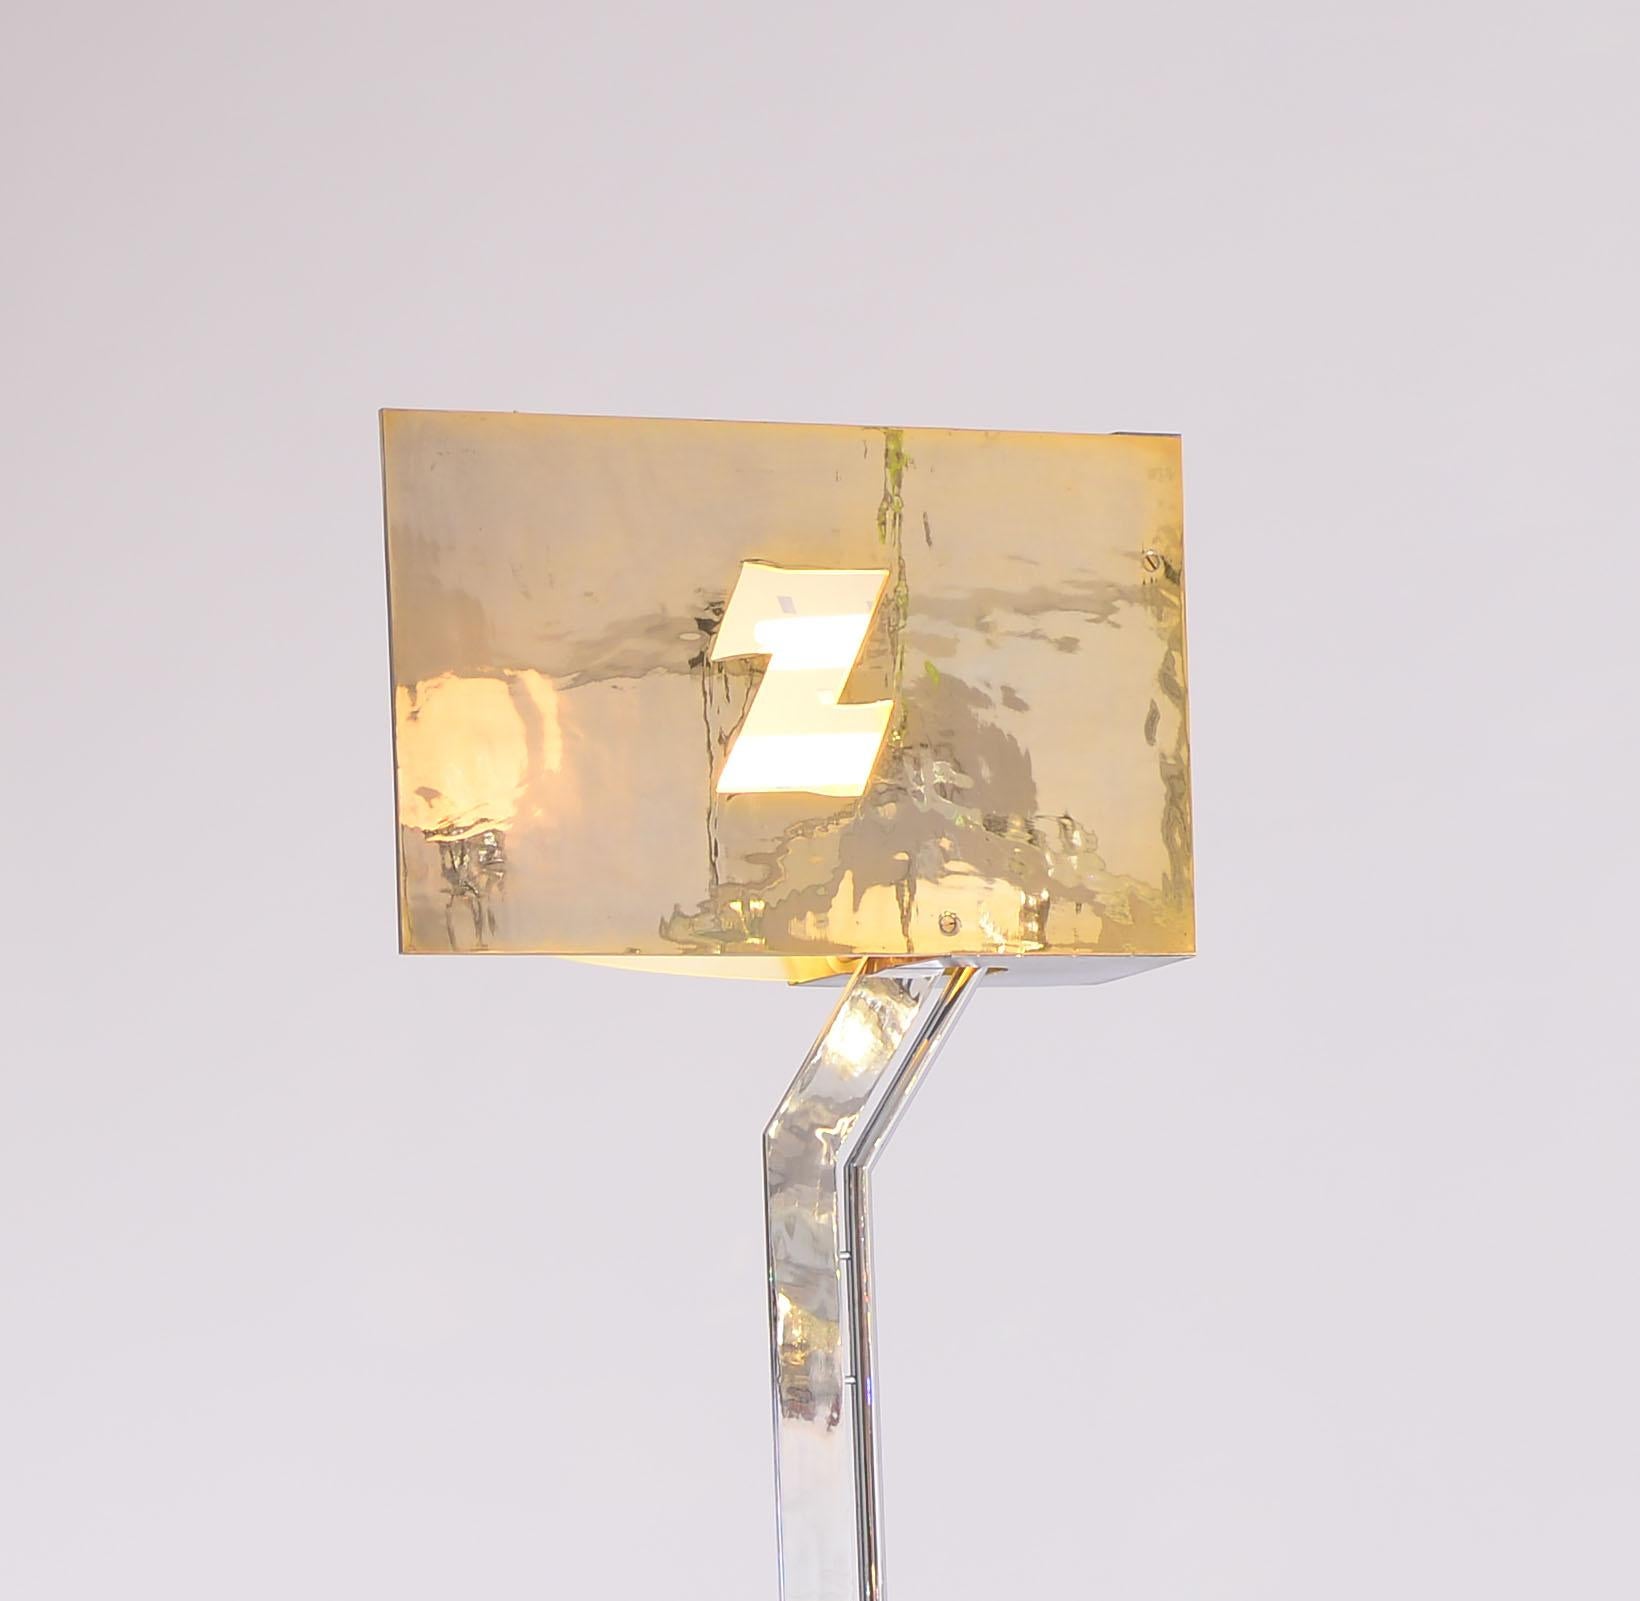 Unique Postmodern Floor Lamp by Hans Hollein for the Central Bank Austria In Excellent Condition For Sale In Vienna, AT